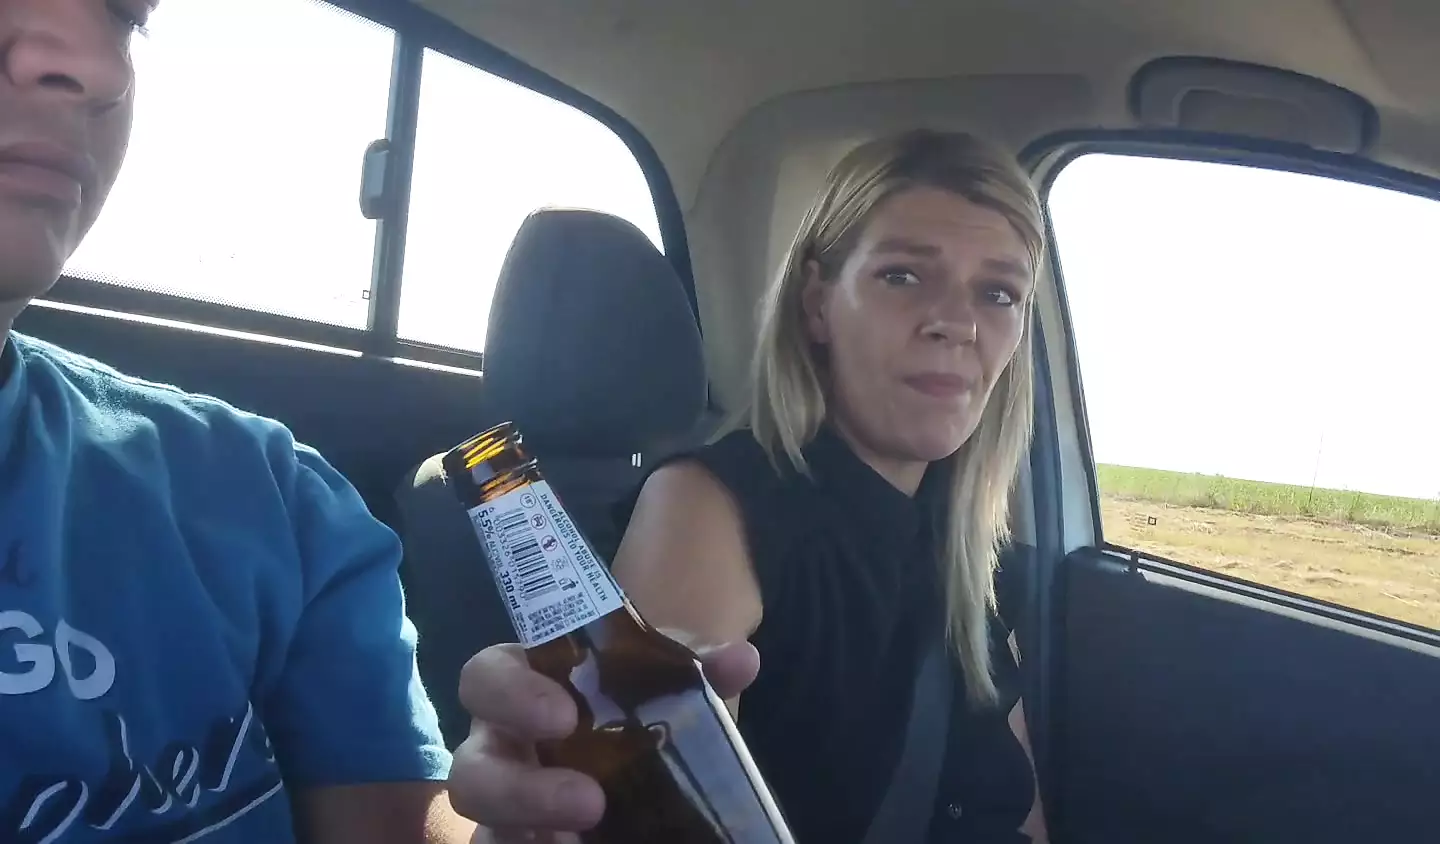 Sweet tinder date s first blowjob while driving